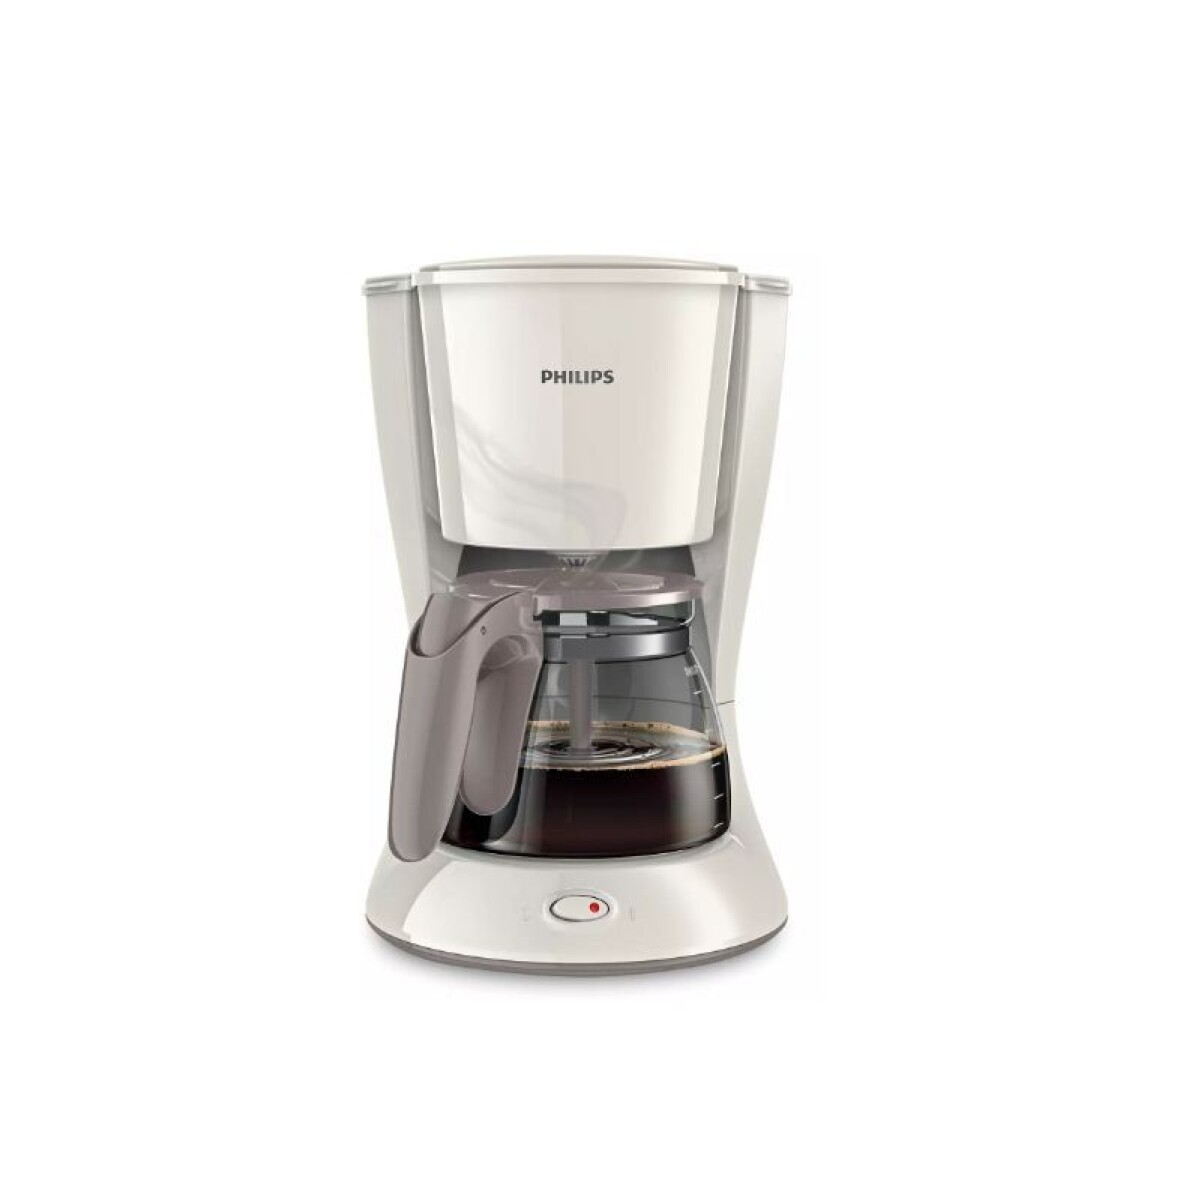 CAFETERA PHILIPS 1080 W 